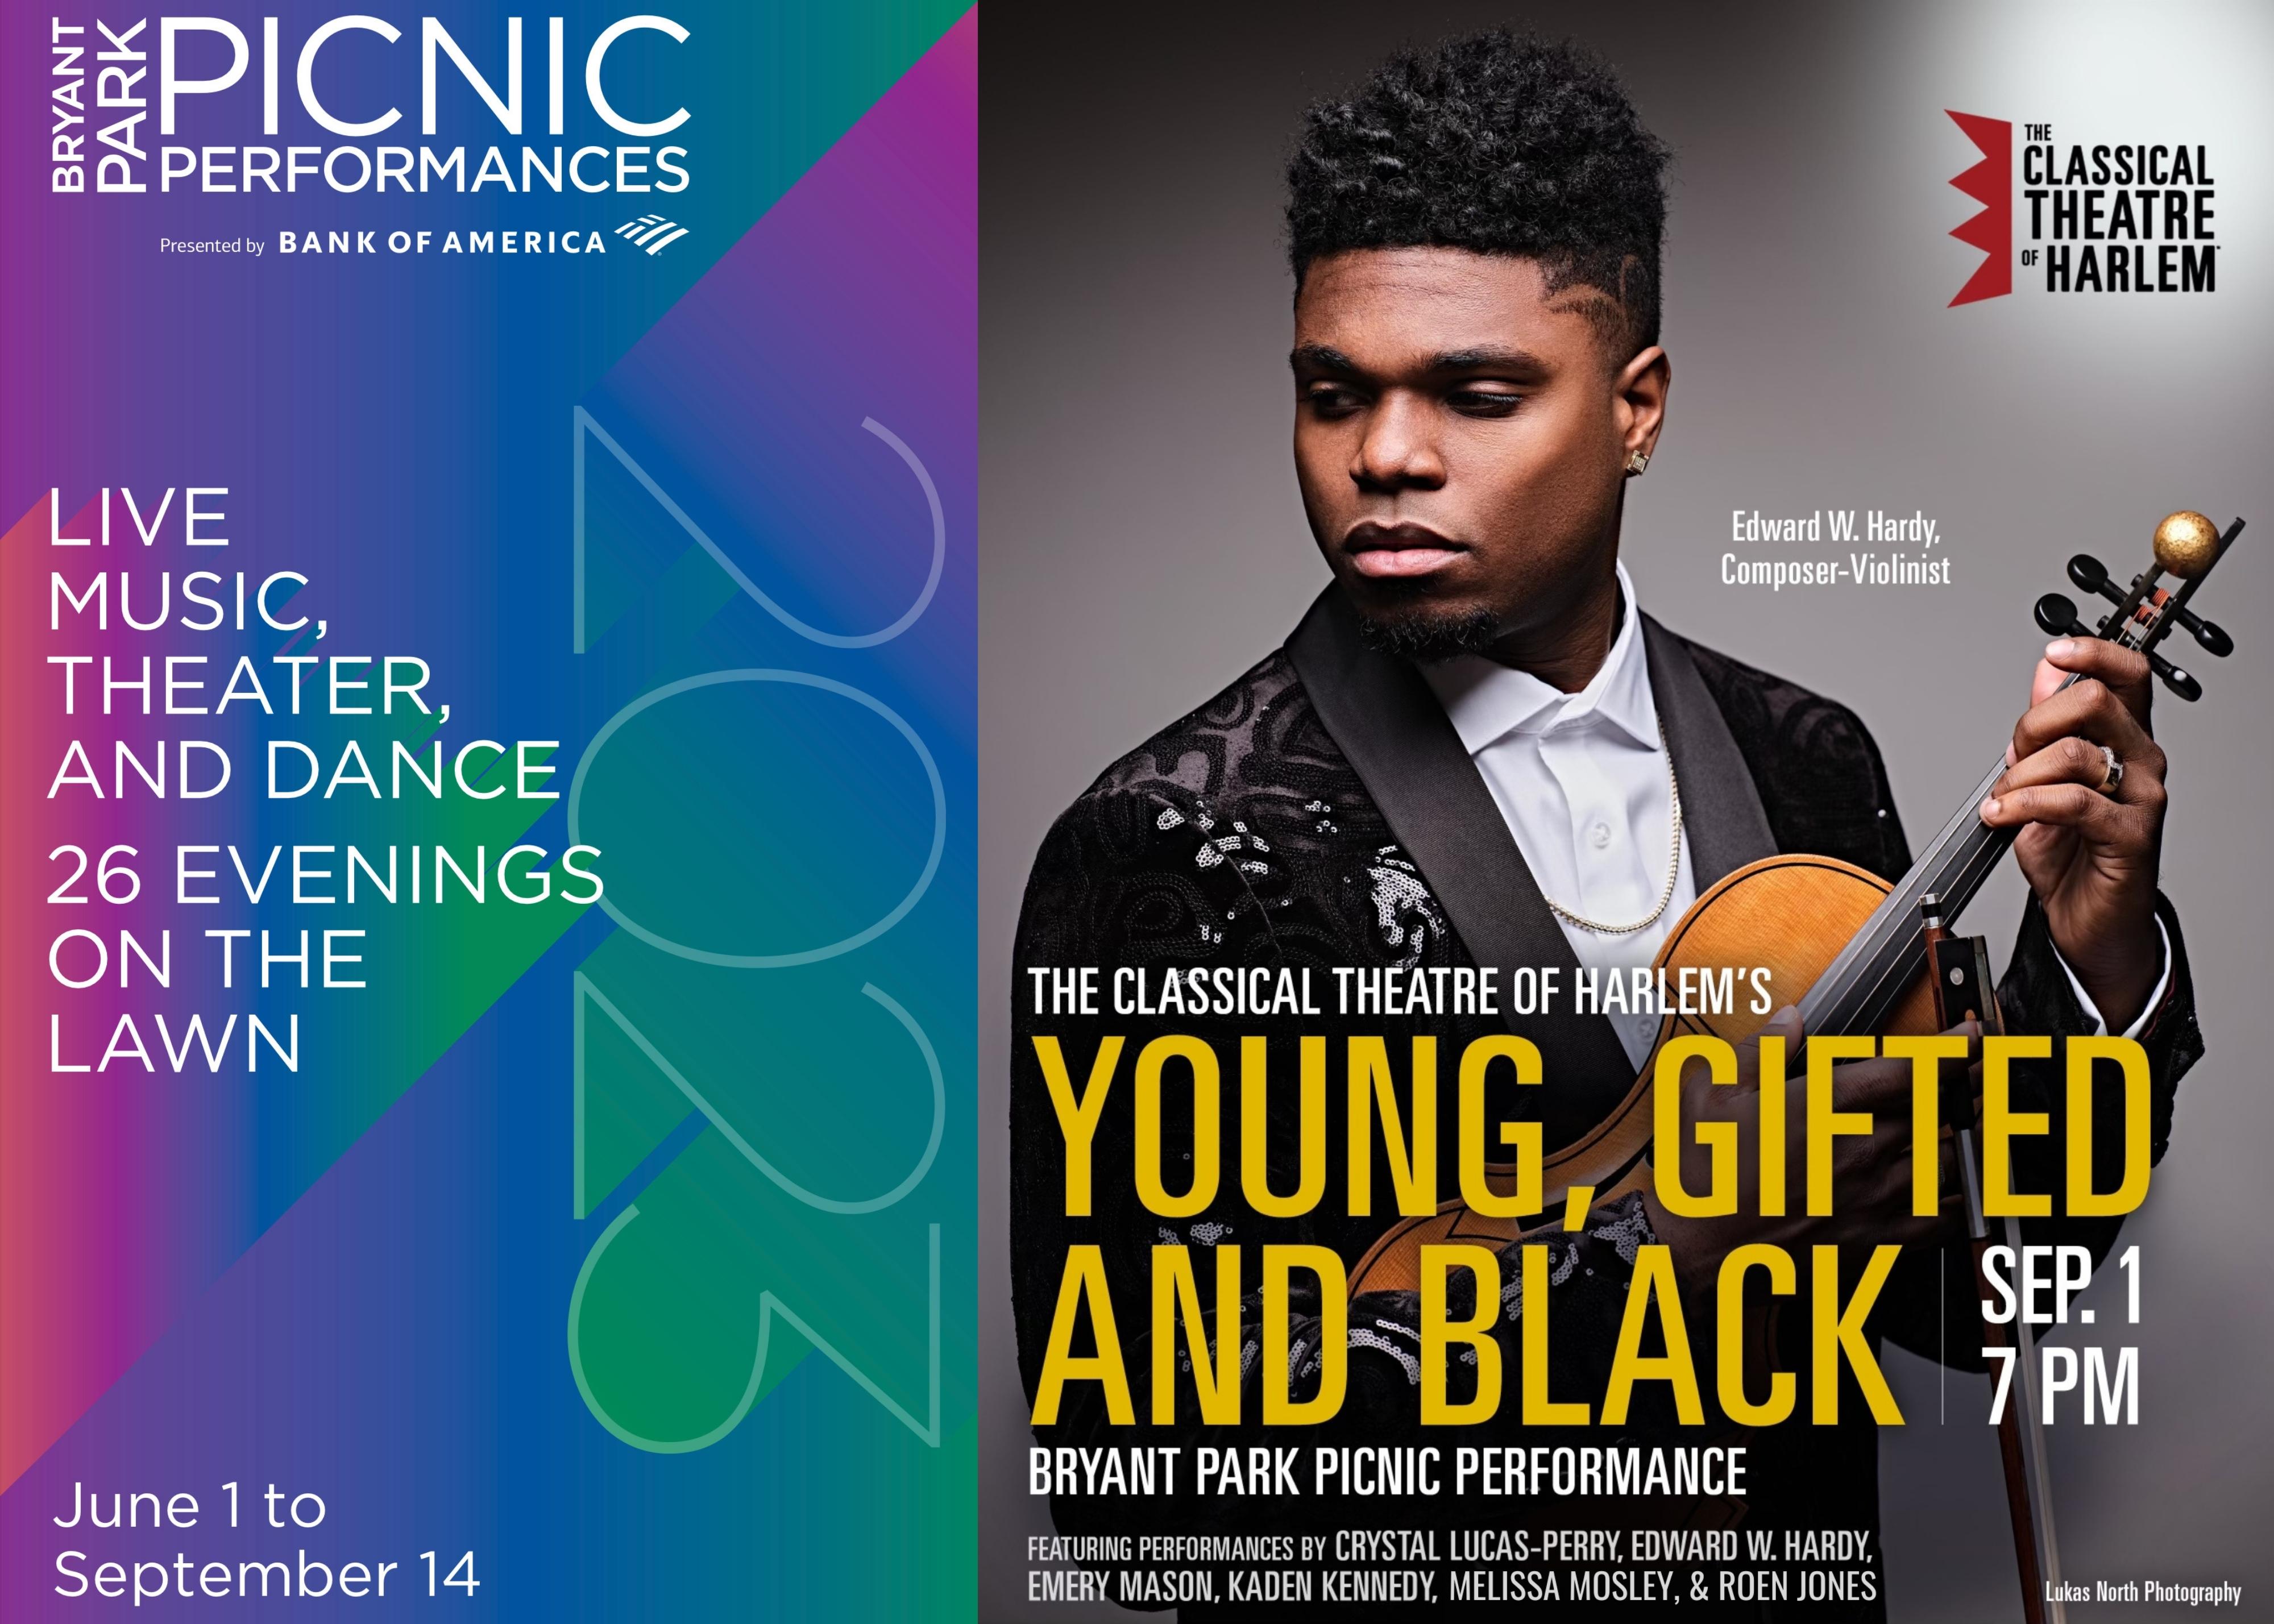 The Classical Theatre of Harlem: YOUNG, GIFTED AND BLACK, Bryant Park Picnic Performances, Edward W. Hardy poster (2023)